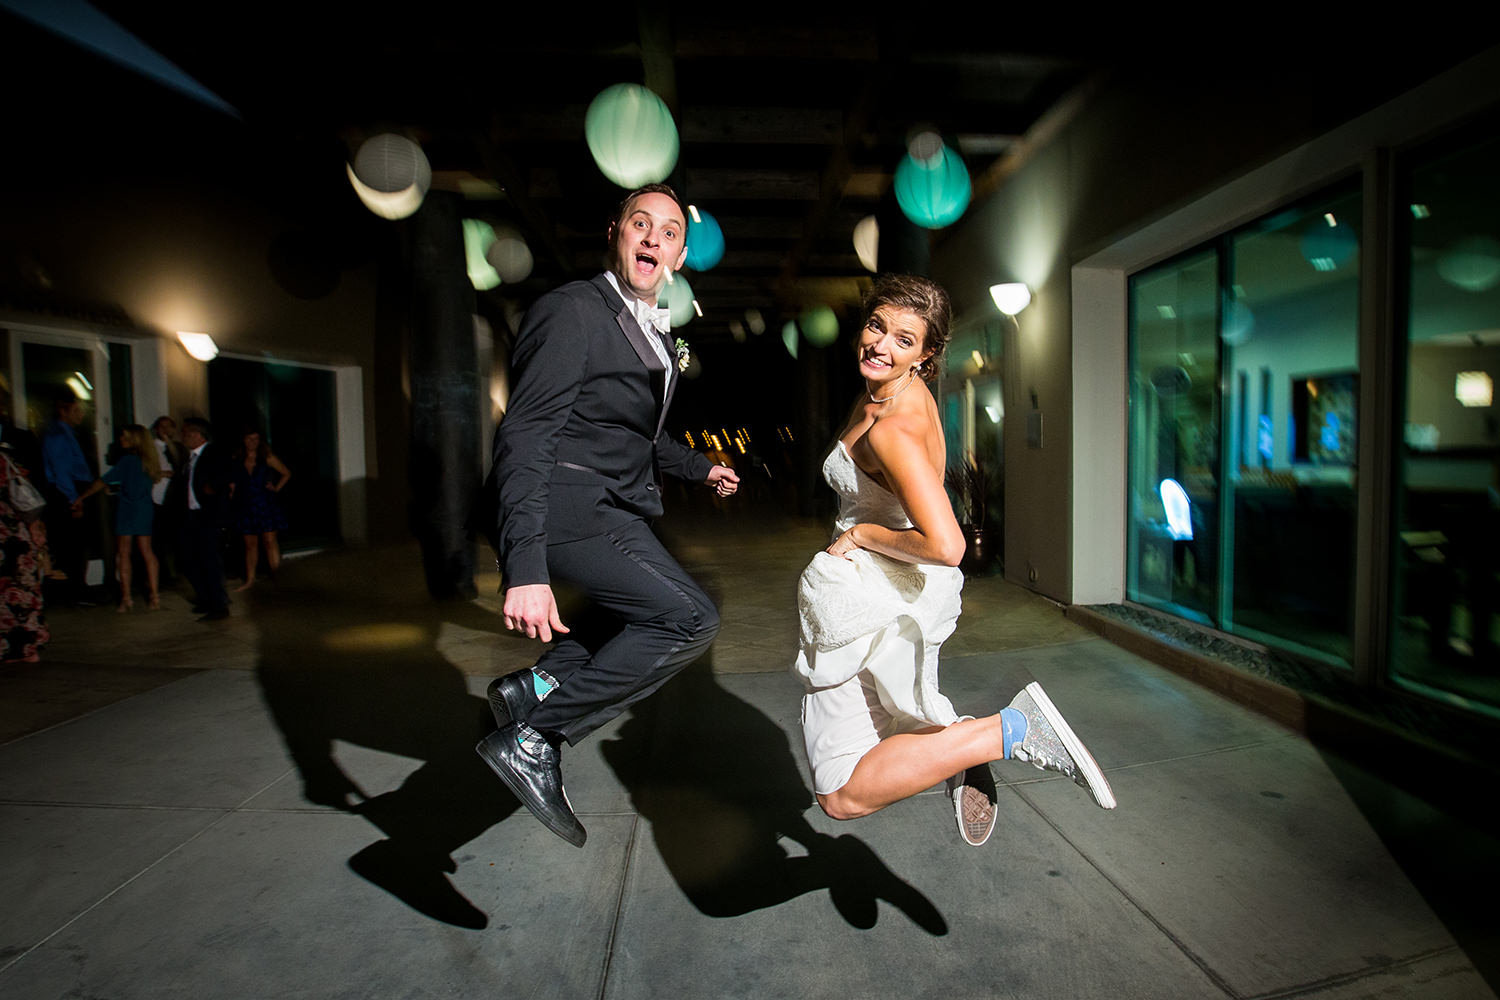 jumping night time shot with bride and groom